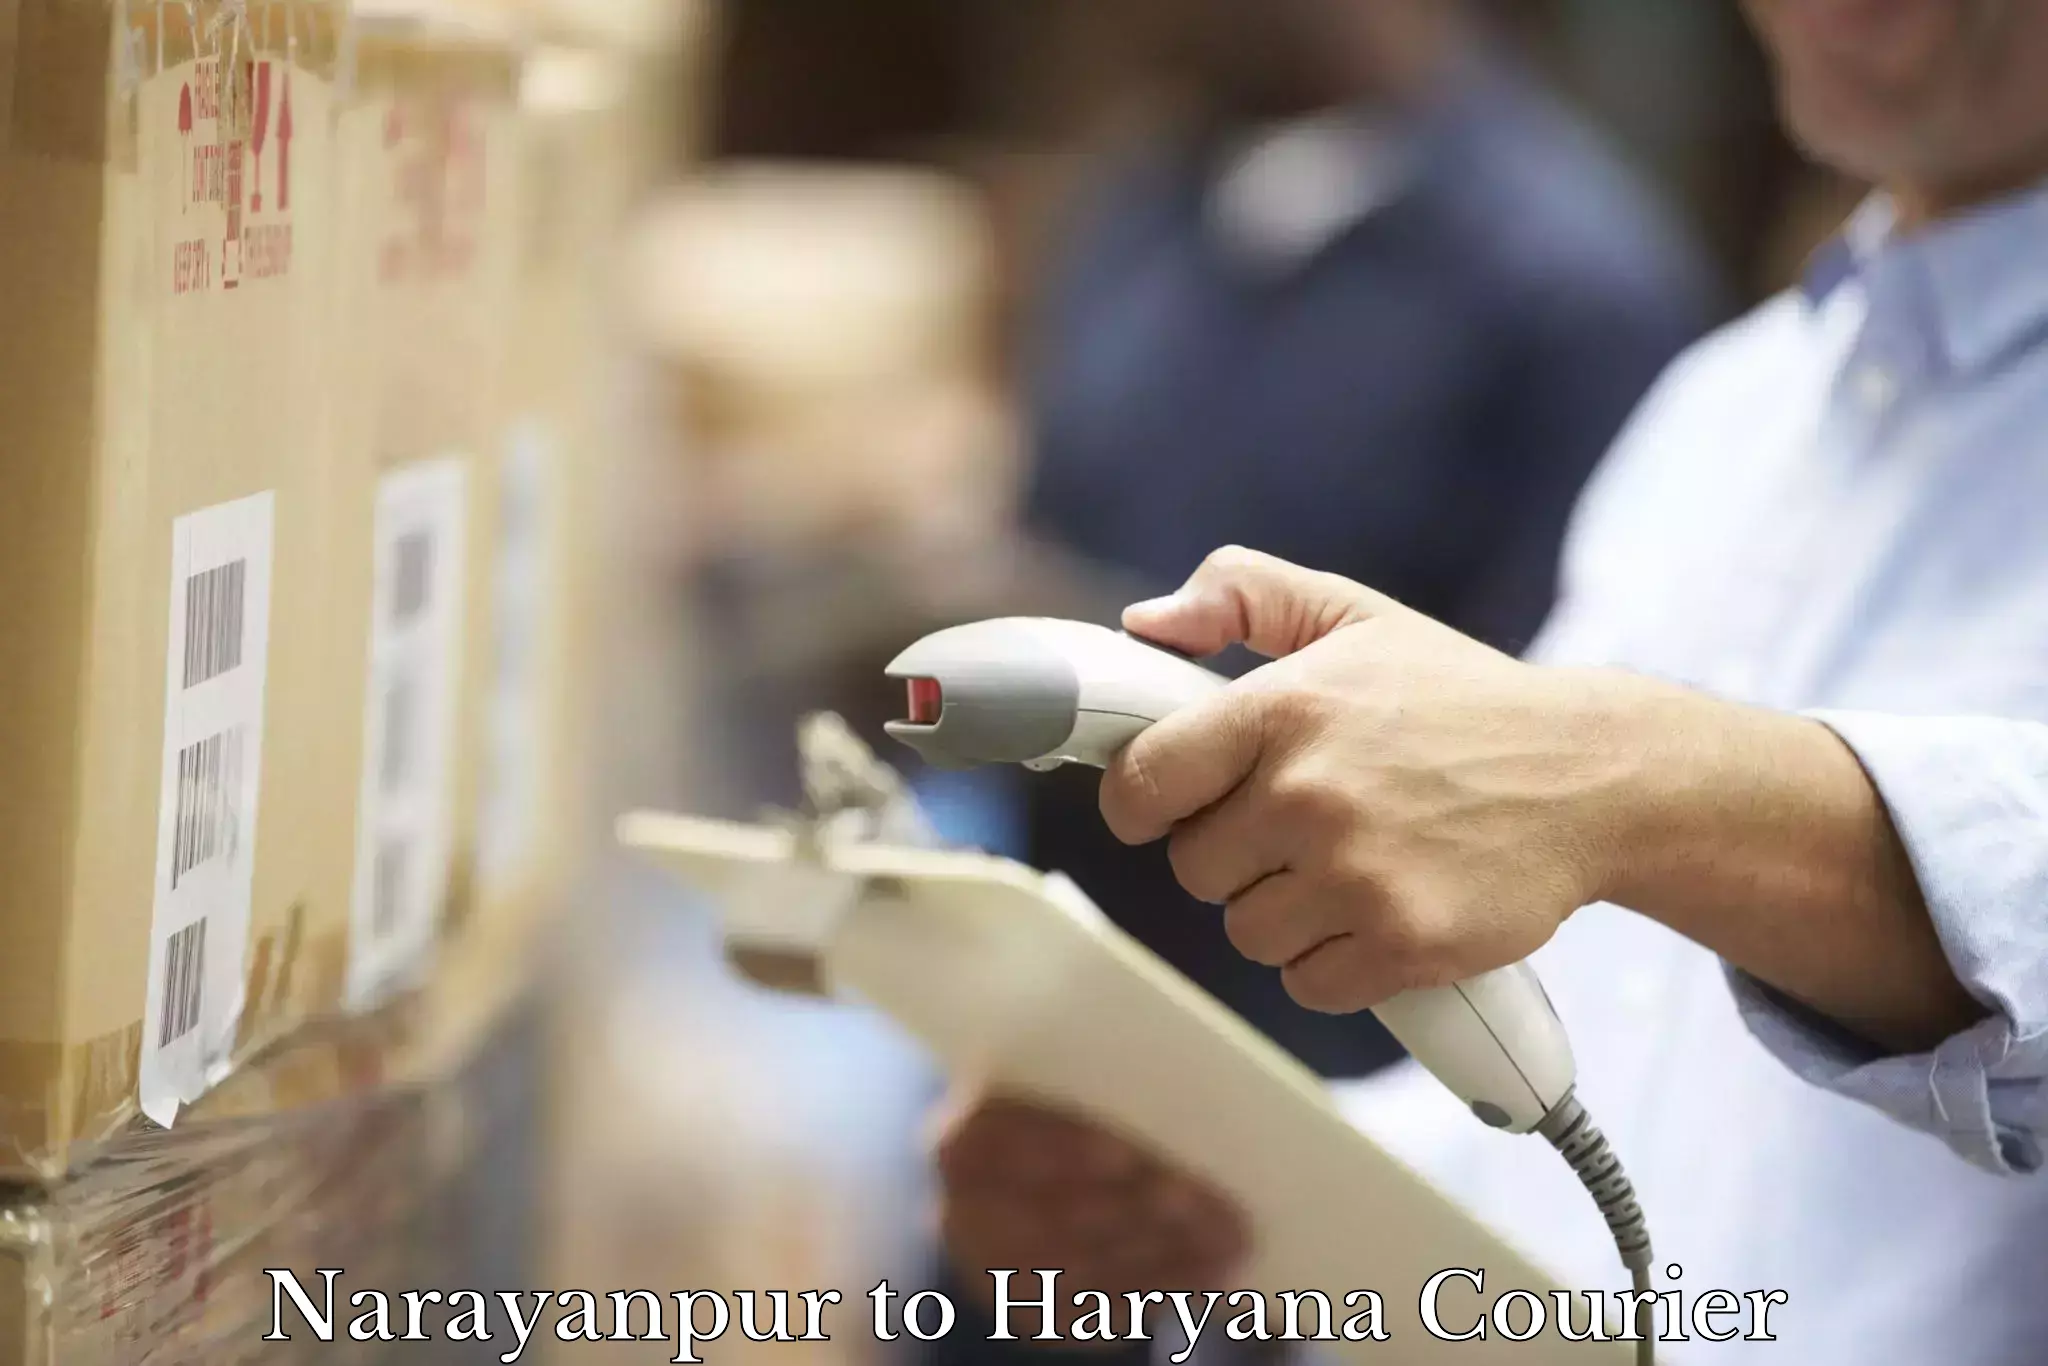 Reliable delivery network Narayanpur to Haryana